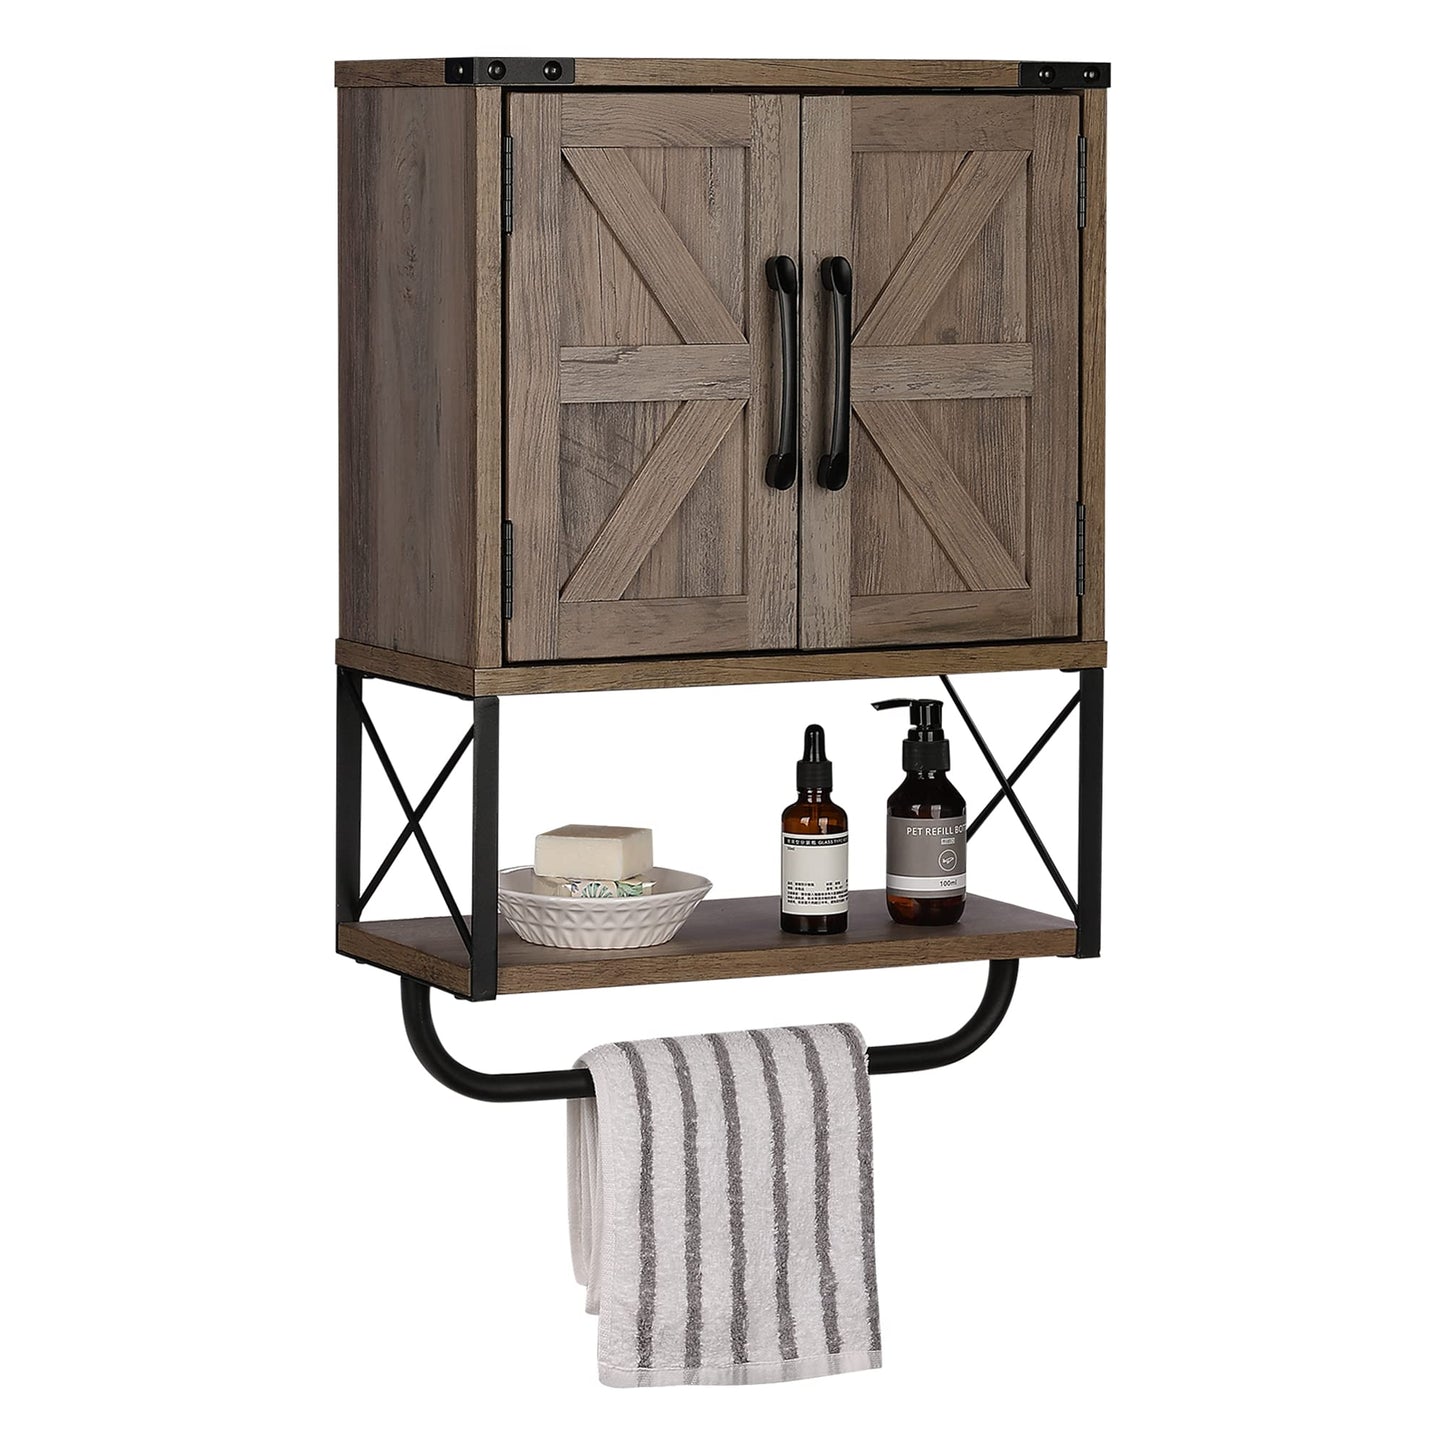 RUSTOWN Farmhouse Rustic Medicine Cabinet with Two Barn Door,Wood Wall Mounted Storage Cabinet with Adjustable Shelf and Towel Bar, 3-Tier Cabinet